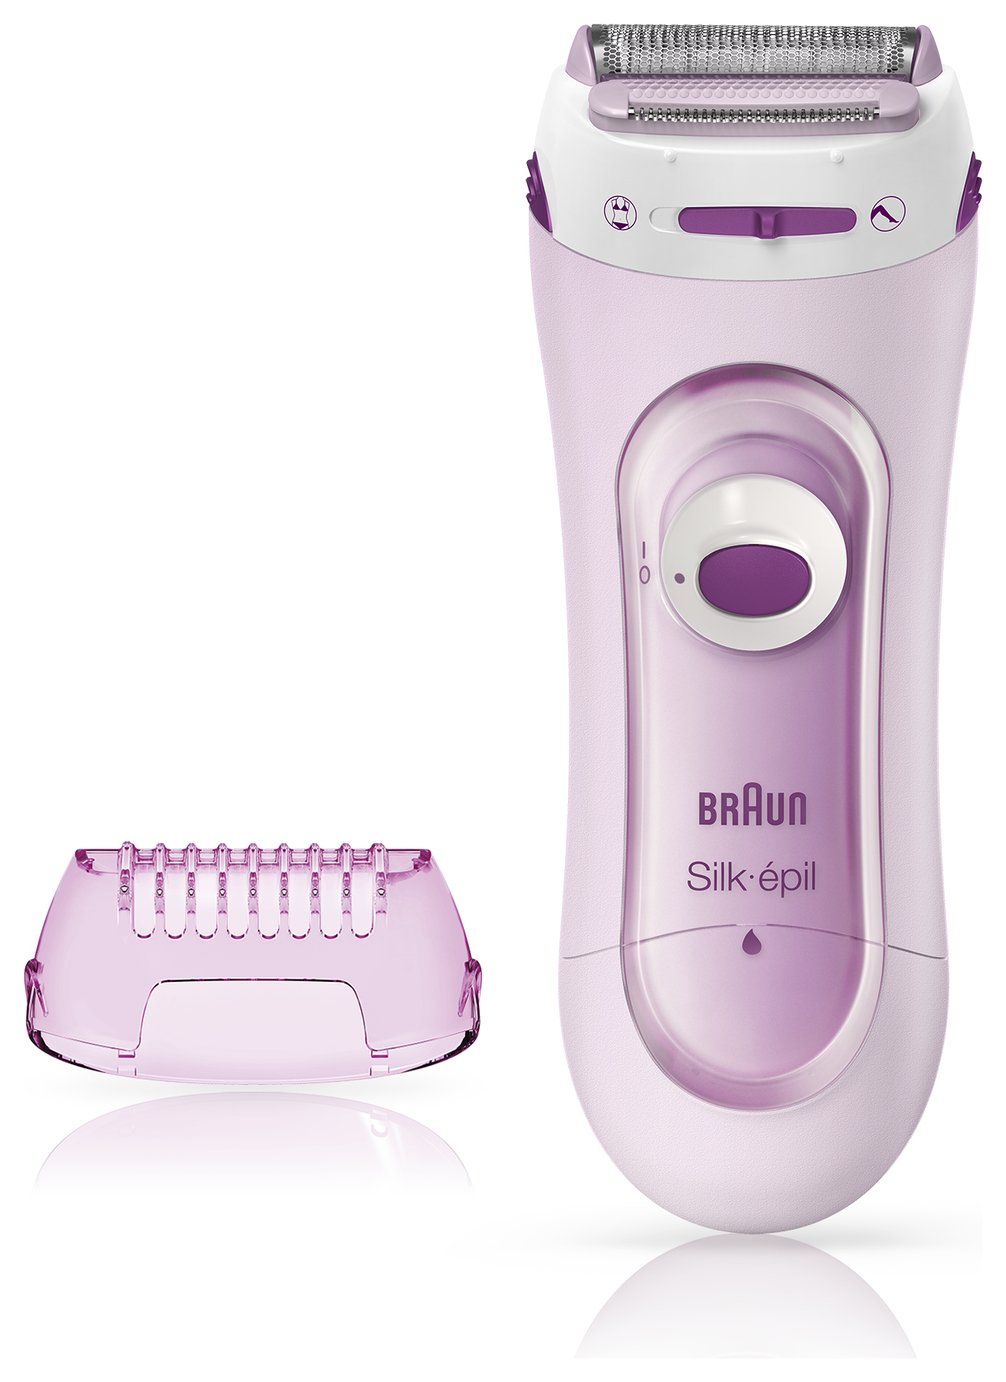 Braun Silk-epil Wet and Dry Cordless Lady Shaver